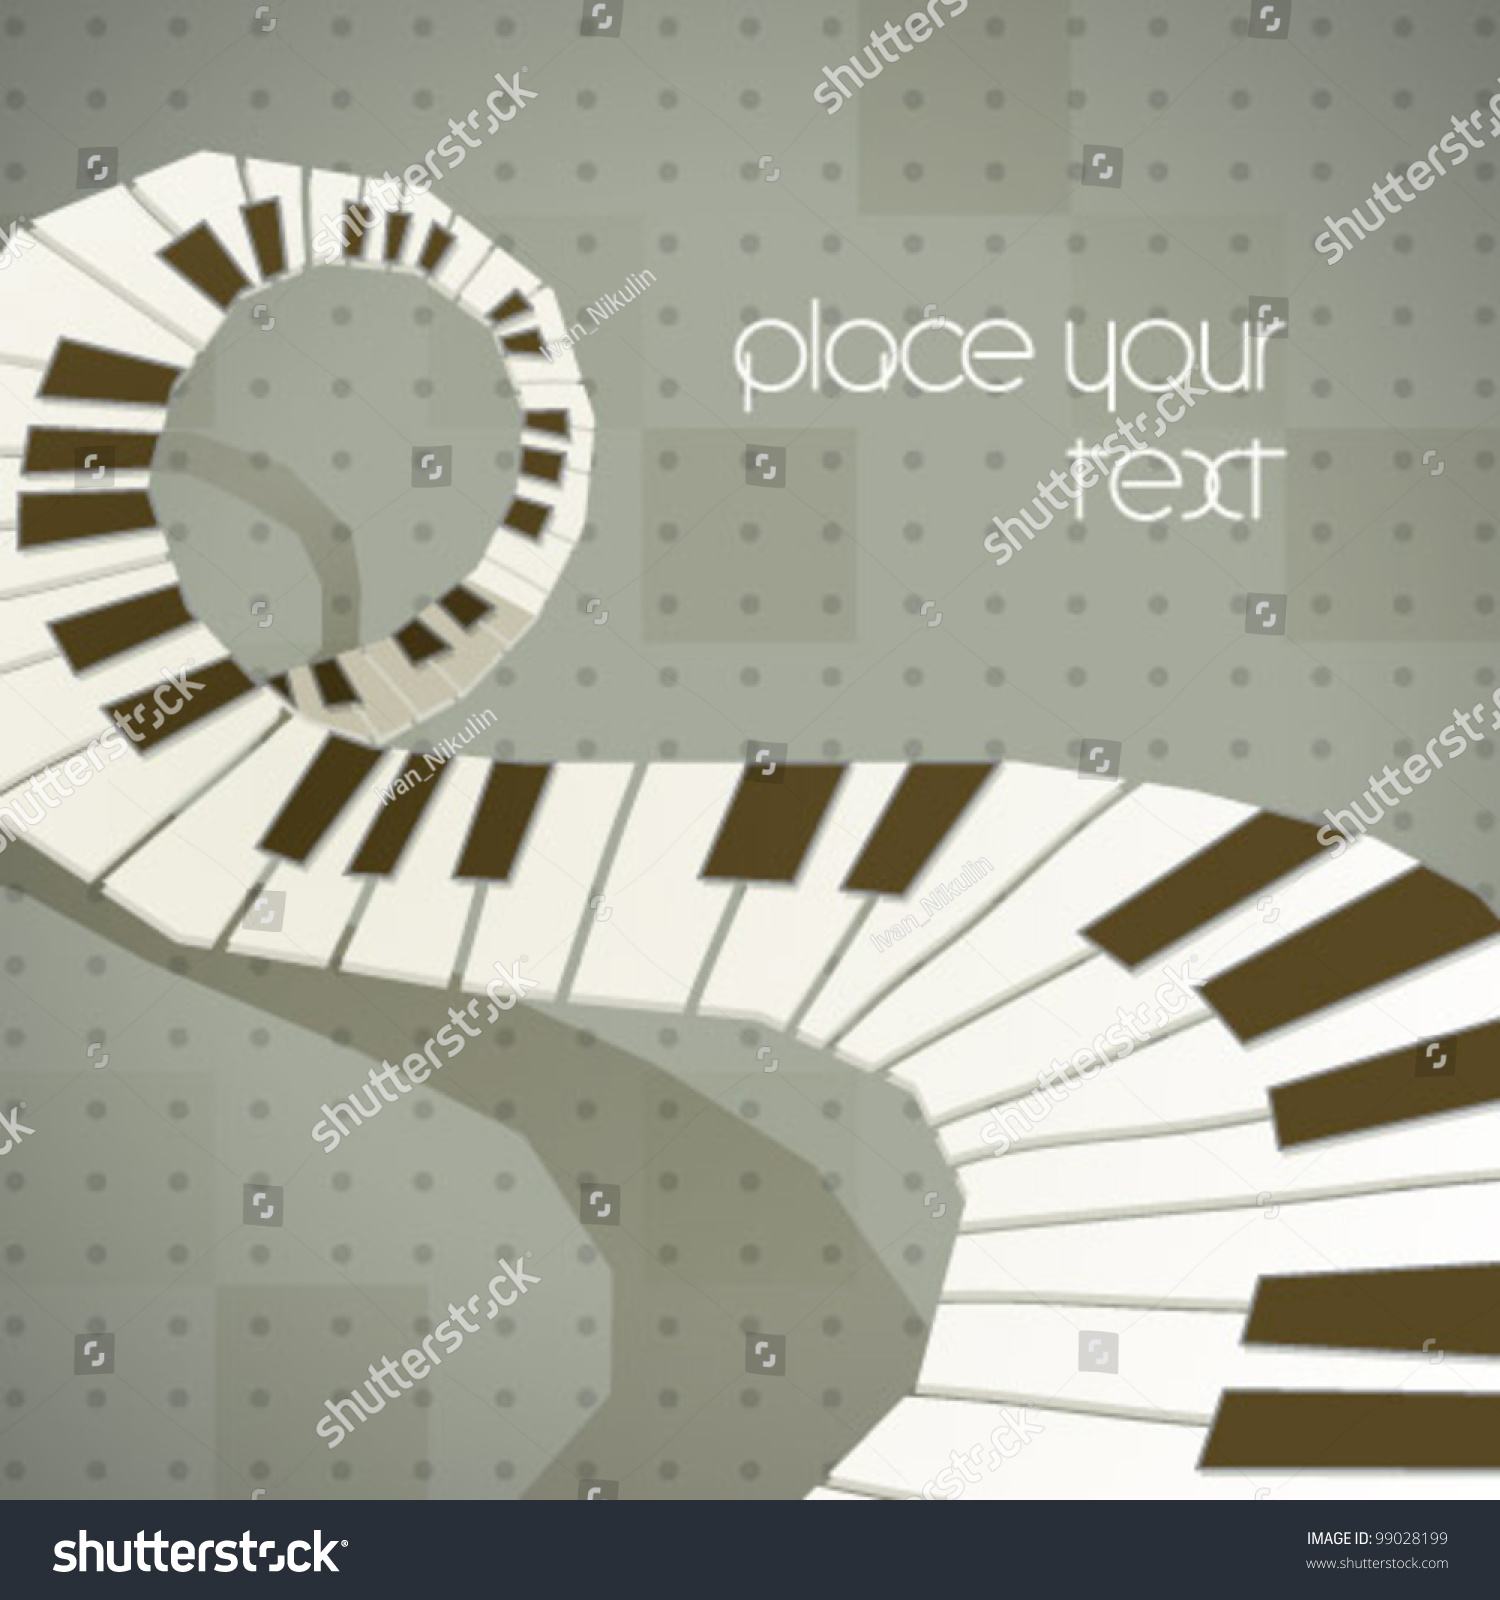 Vector Abstract Music Piano Background   99028199